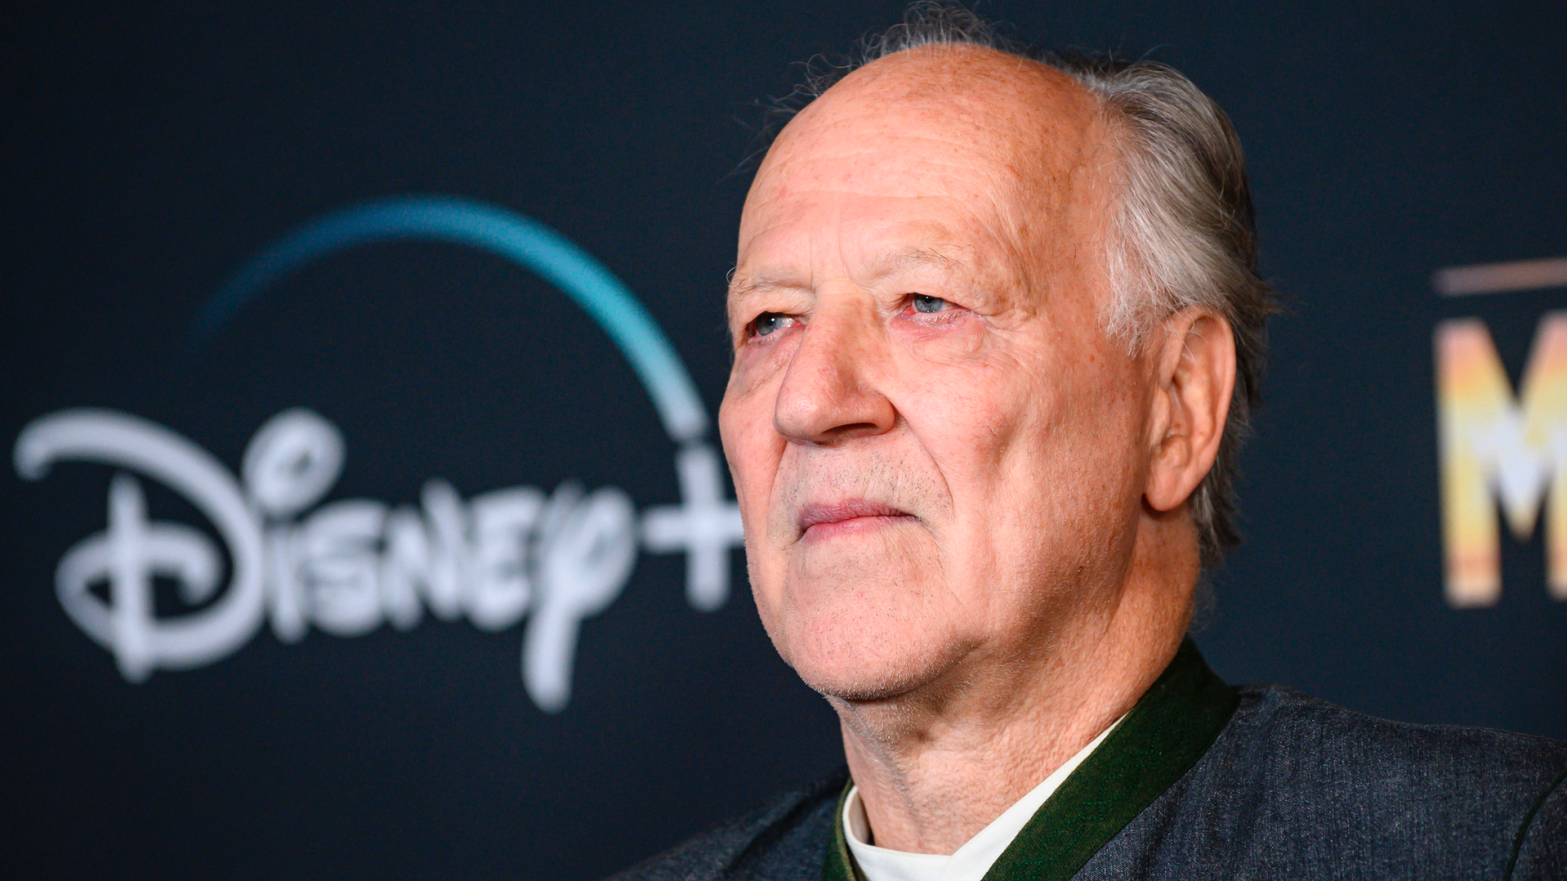 Werner Herzog arrives for Disney+ world premiere of The Mandalorian at El Capitan Theatre in Hollywood on November 13, 2019. (Photo: Photo by Nick Agro/AFP, Getty Images)